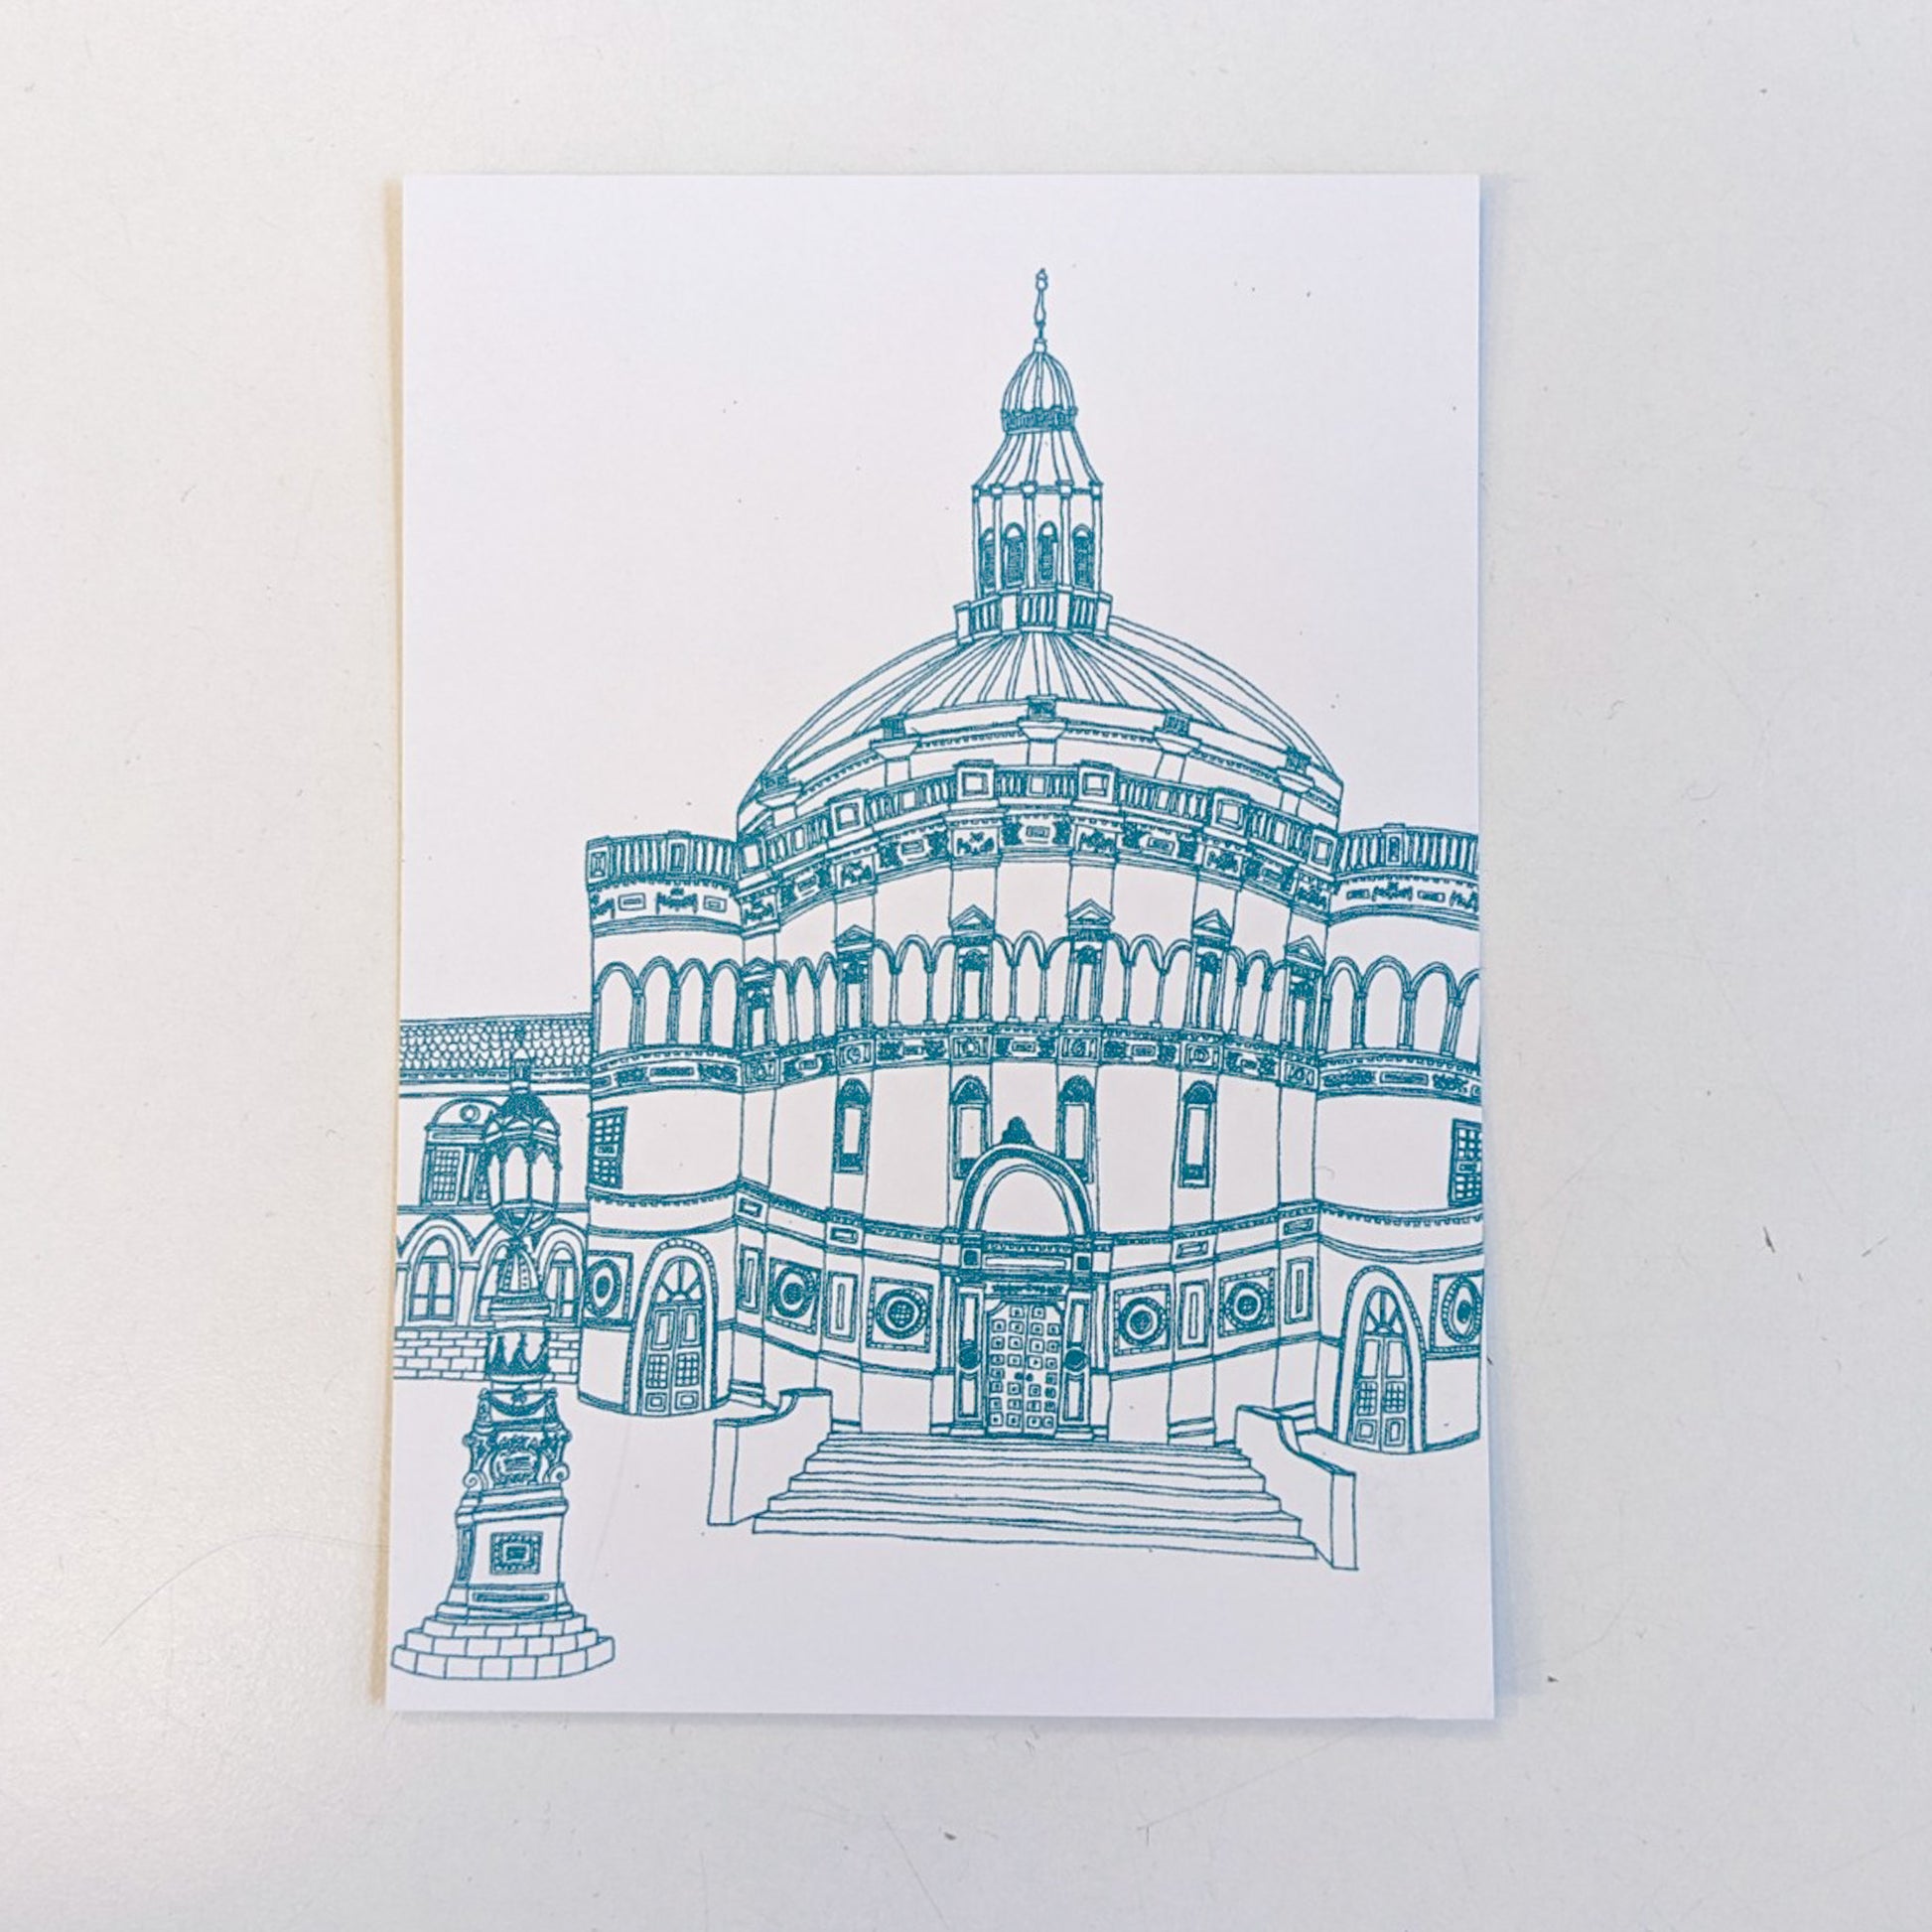 Illustrated postcard of McEwan Hall by Victoria Rose Ball. The lines are in a teal blue, set on a white background. The postcard itself is also set on a white background.